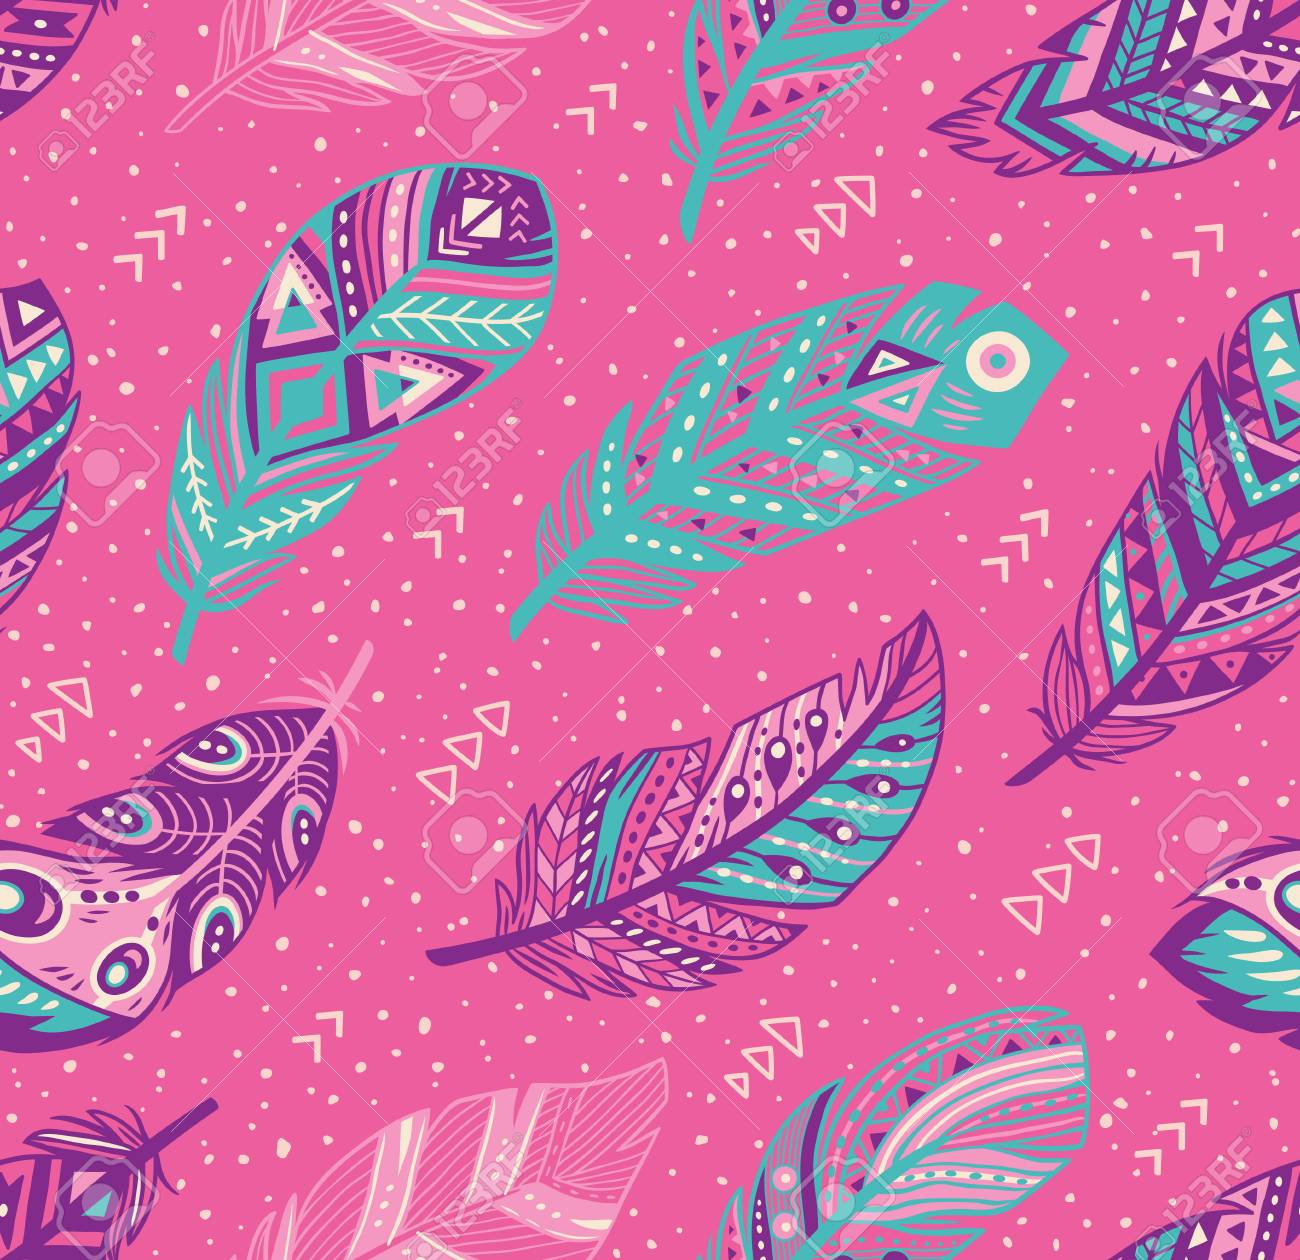 Decorative Feathers Pattern Tribal In Blue Pink And